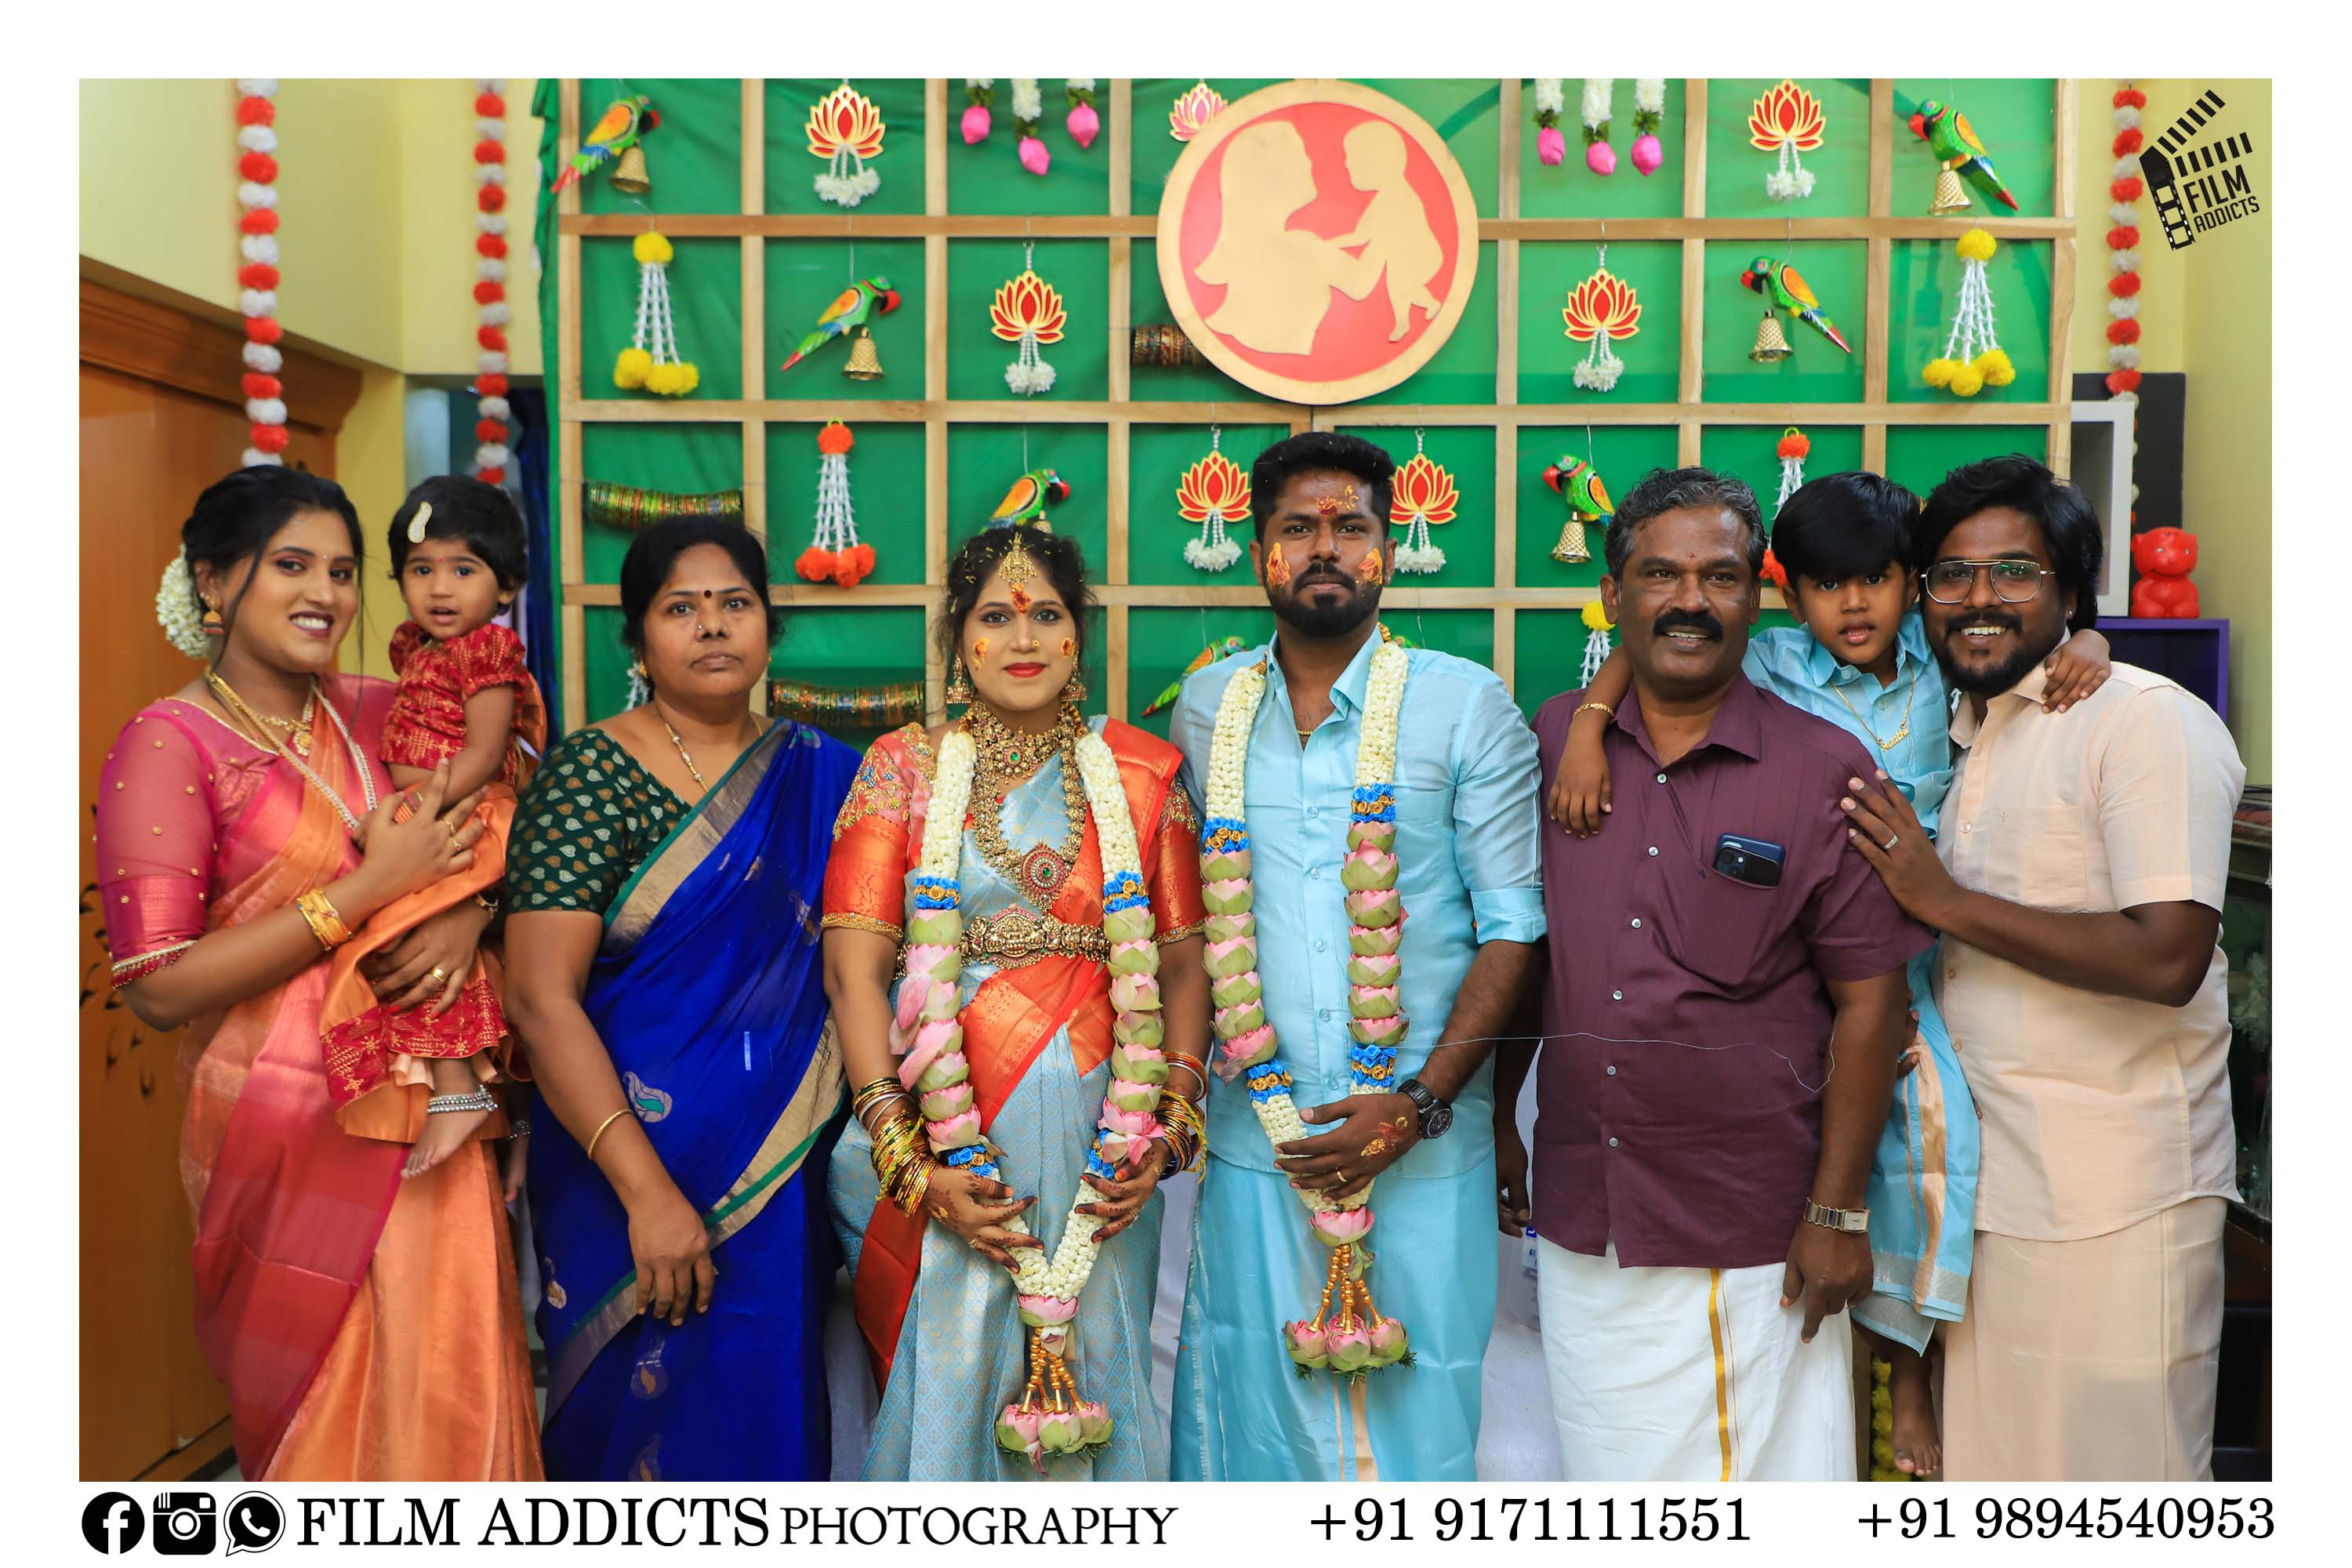 Best Baby Shower Photography in Theni-FilmAddicts Photography, Best Wedding Candid photographers in Theni,  Wedding Candid Moments FilmAddicts, Photography FilmAddictsPhotography, best wedding in Theni, Best Candid-shoot in Theni, best moment, Best wedding moments, Best wedding photography in Theni, Best wedding videography in Theni, Best couple shoot, Best candid, Best wedding shoot,  best marriage photographers in Theni, best marriage photography in Theni, best candid photography, best Theni photography, Theni photography, Theni couples, candid shoot, candid , tamilnadu wedding photography, best photographers in Theni, tamilnadu.